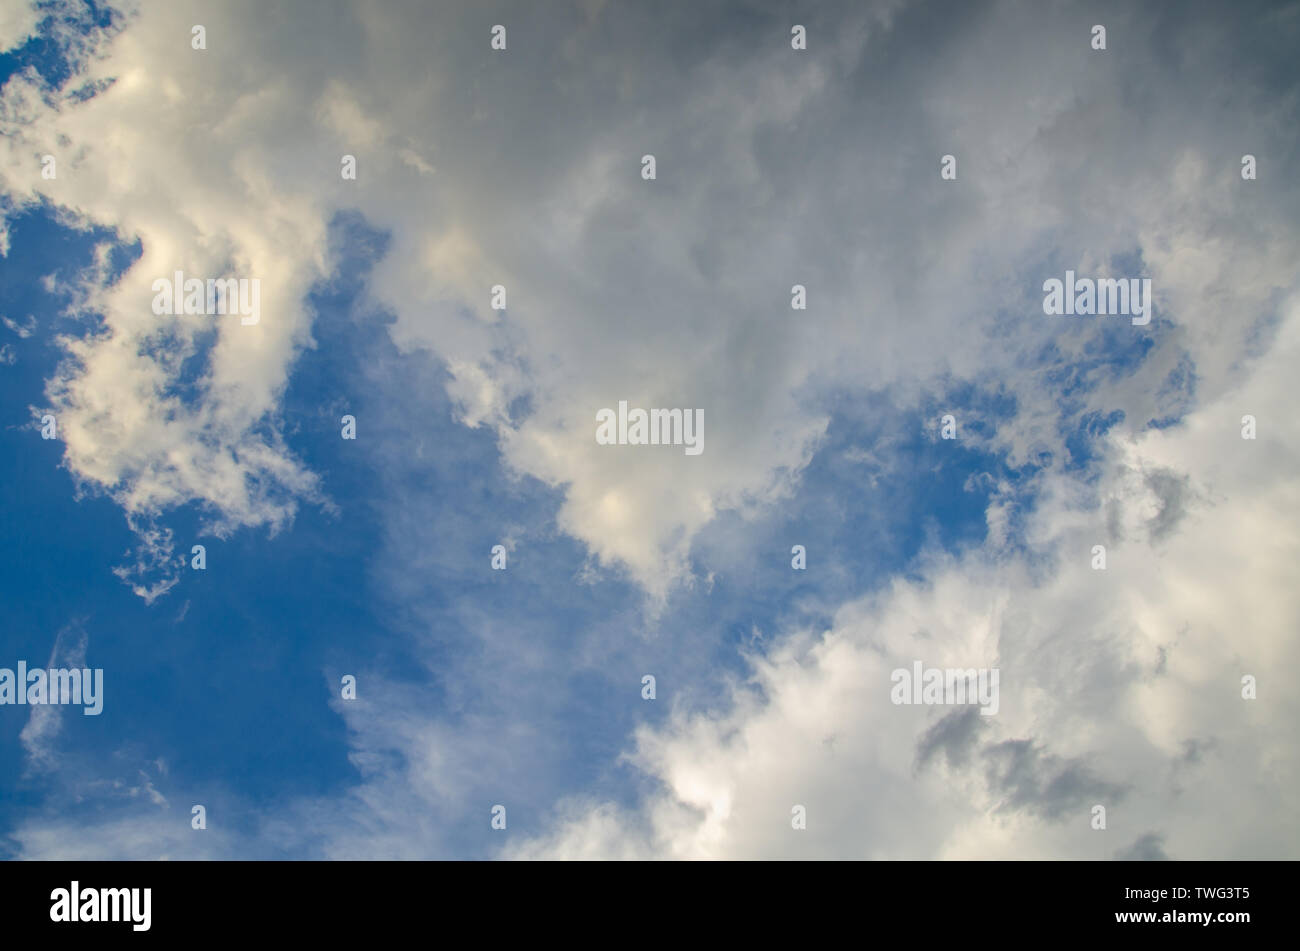 Blue sky background with gray clouds Stock Photo